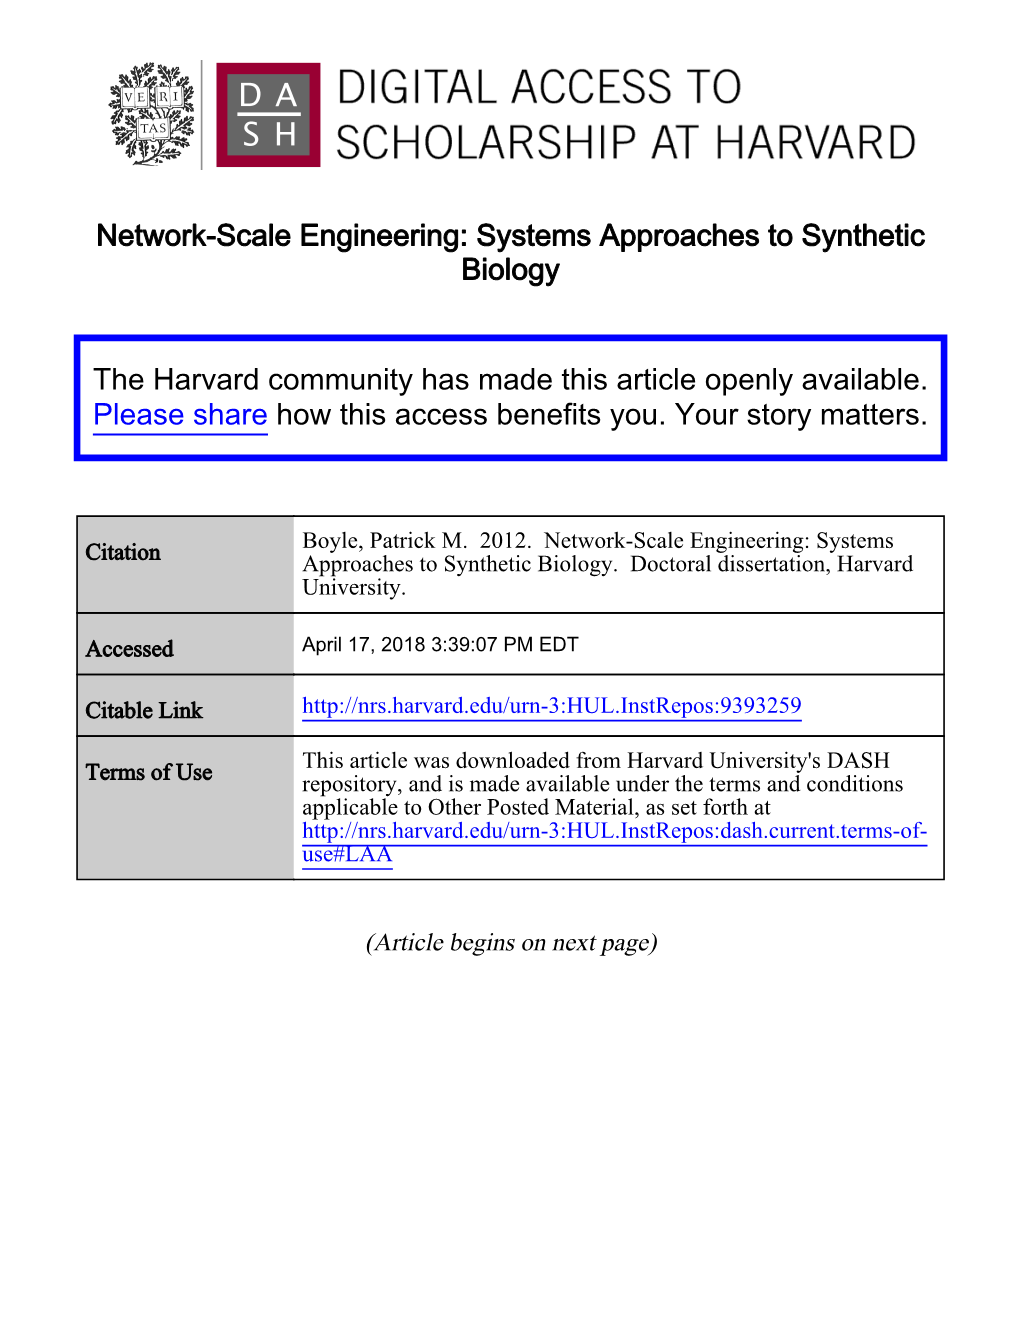 Systems Approaches to Synthetic Biology the Harvard